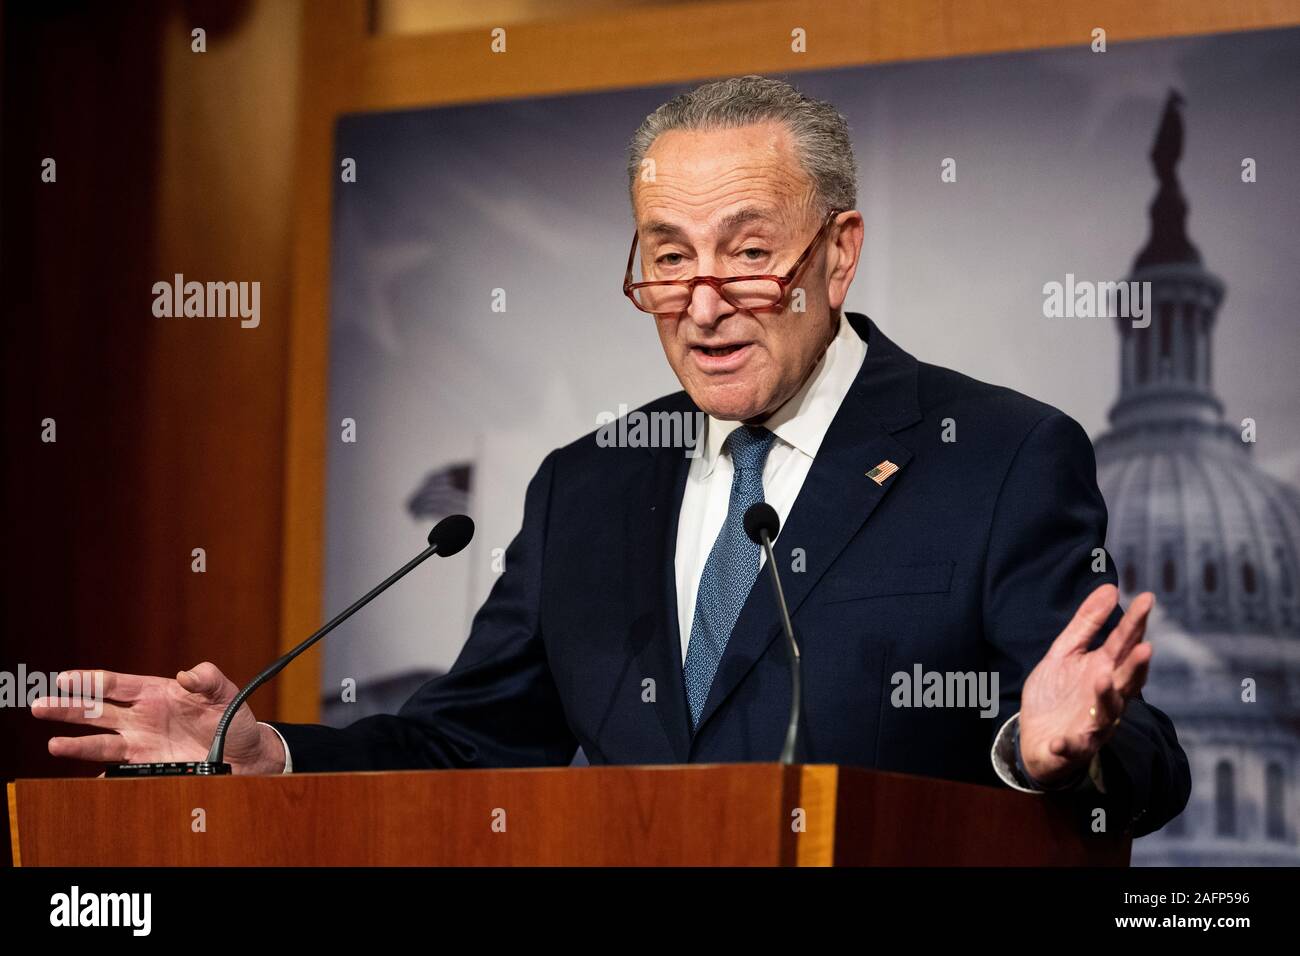 Washington, DC, USA. 16th Dec 2019. U.S. Senator Chuck Schumer (D-NY) speaking at a press conference about a proposed structure for the upcoming impeachment trial. (Photo by Michael Brochstein/Sipa USA) Credit: Sipa USA/Alamy Live News Stock Photo